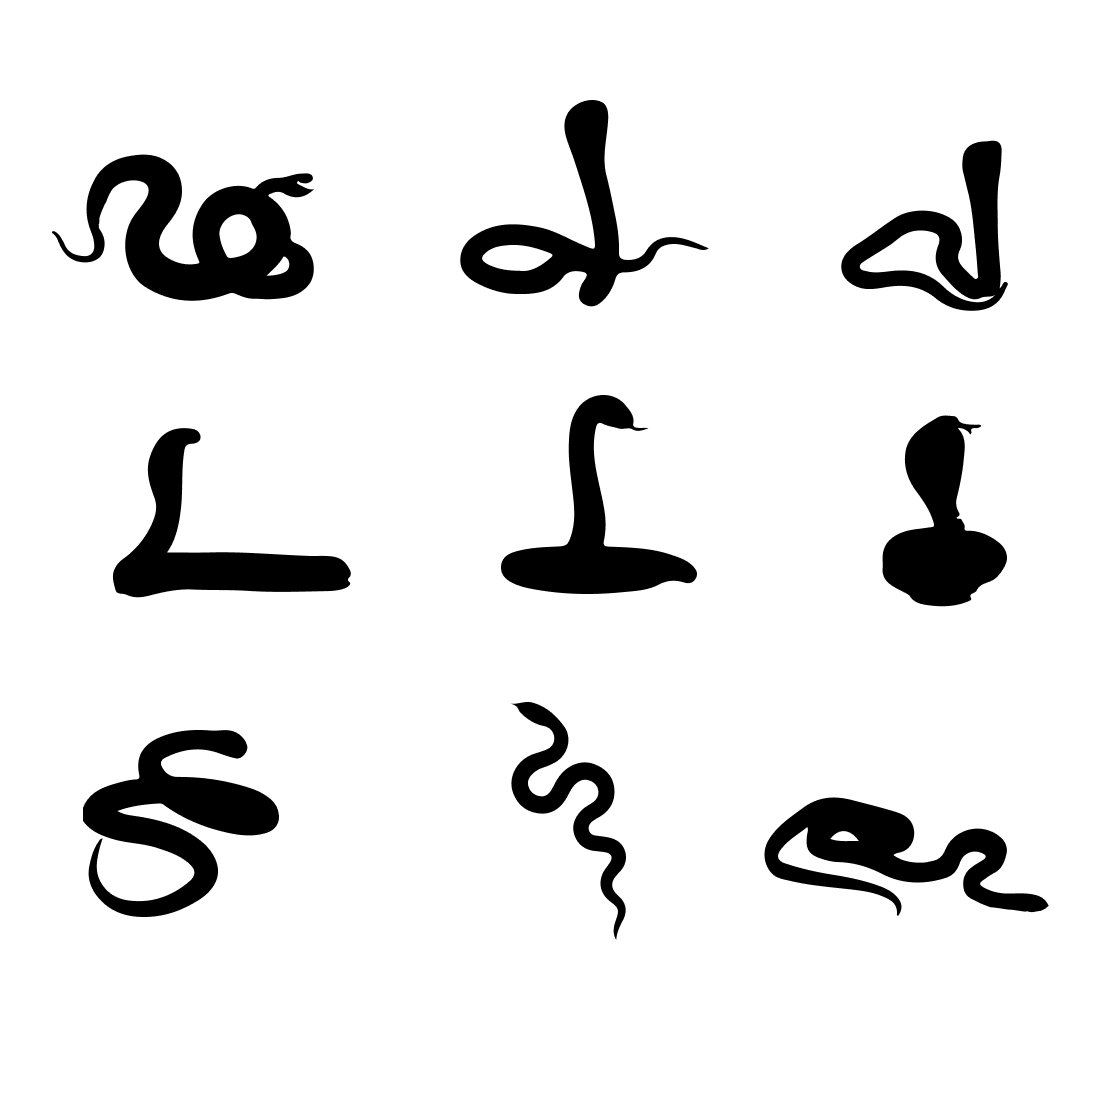 Number of different types of writing on a white background.